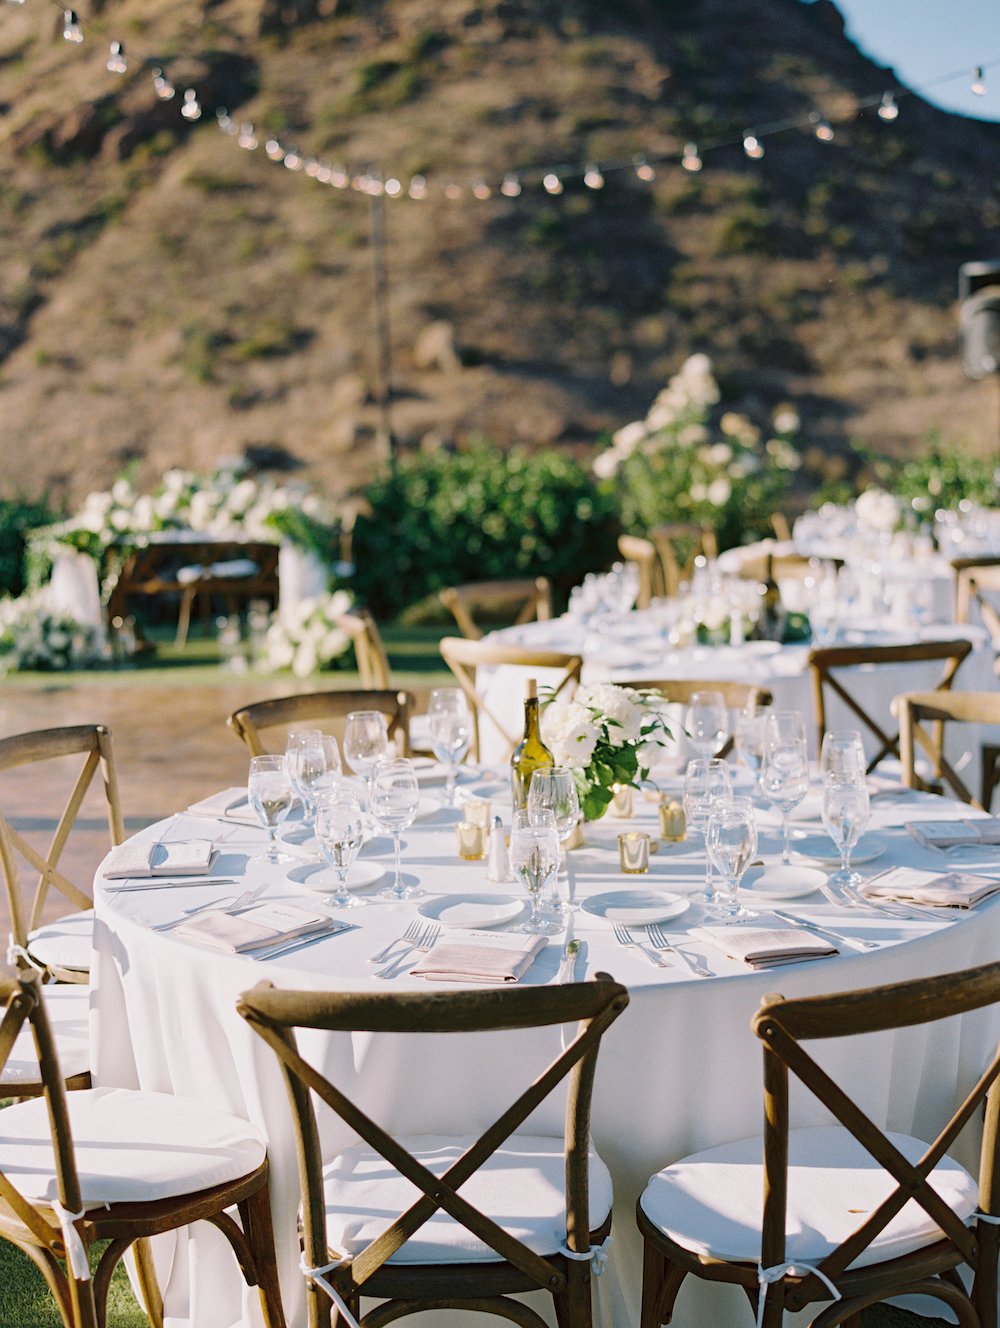 Outdoor wedding reception tables with white linens and wooden cross-back chairs.